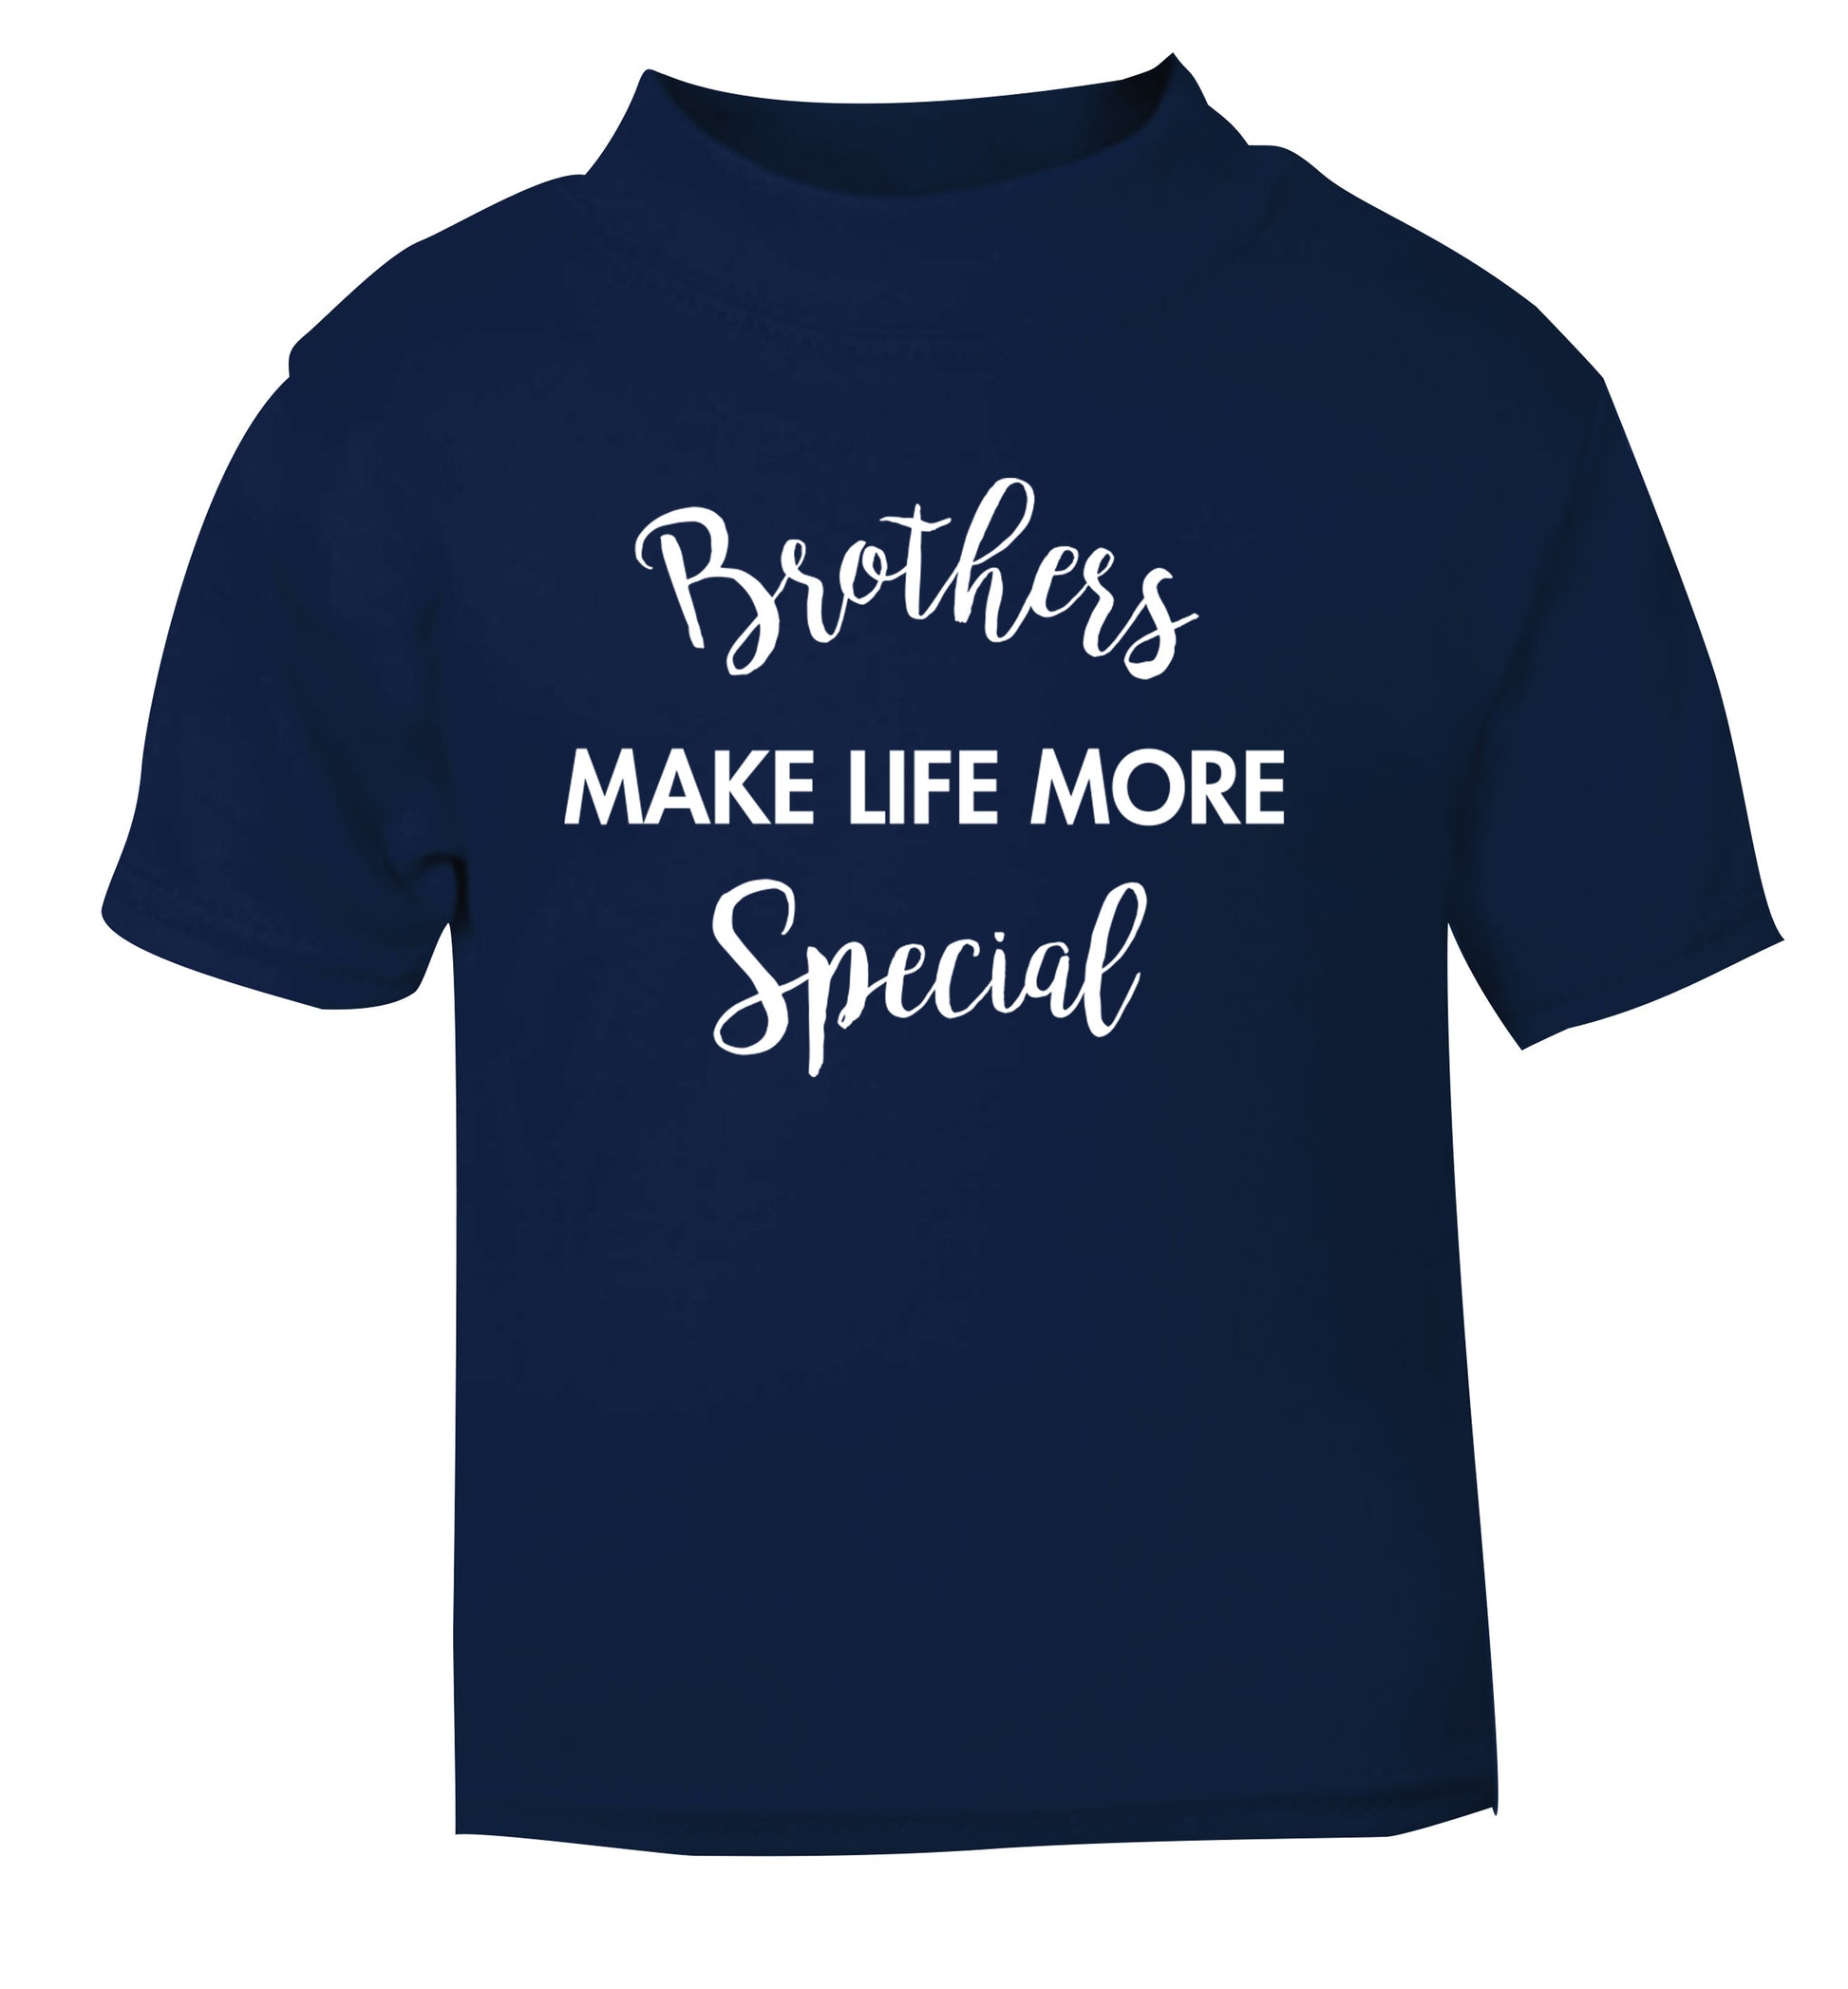 Brothers make life more special navy Baby Toddler Tshirt 2 Years